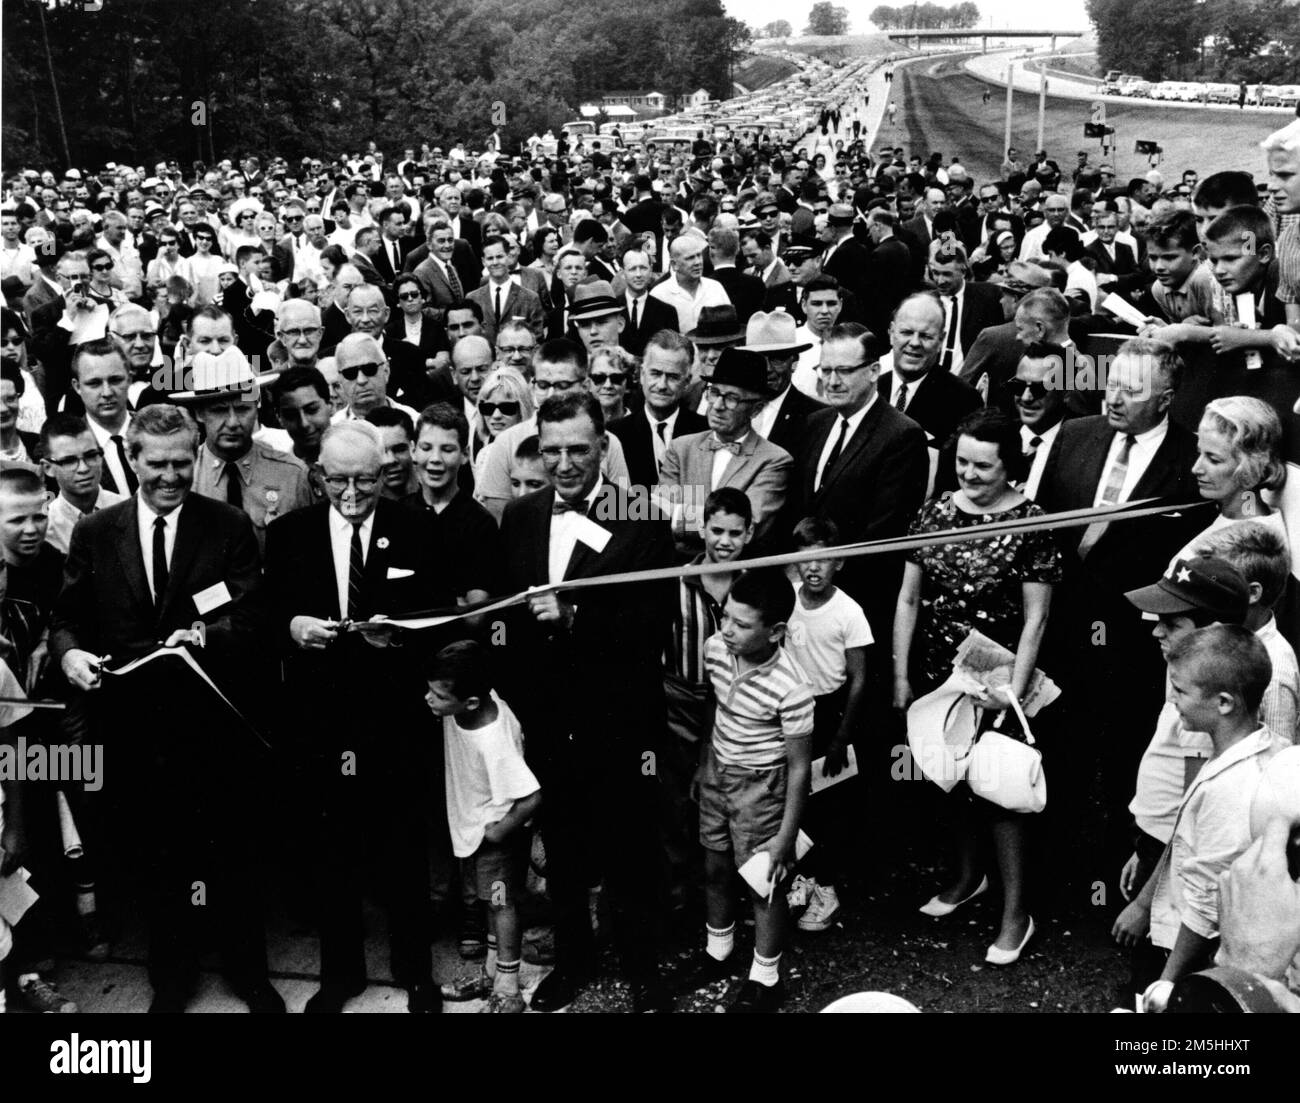 Photograph Taken in Maryland of the Ceremony Opening the Final Link of the Capital Beltway Around Washington, DC with Federal Highway Administrator Whitton and Maryland Governor Tawes Cutting the Ribbon, and John B. Funk, Chairman of the Maryland State Highway Commission Assisting. undefined. 1964-08-17T00:00:00. National Archives at College Park - Archives II (College Park, MD). Photographic Print. Department of Transportation. Federal Highway Administration. Office of Information and Management Services. Management Services Division. 1994- ?. General Photograph Files Stock Photo